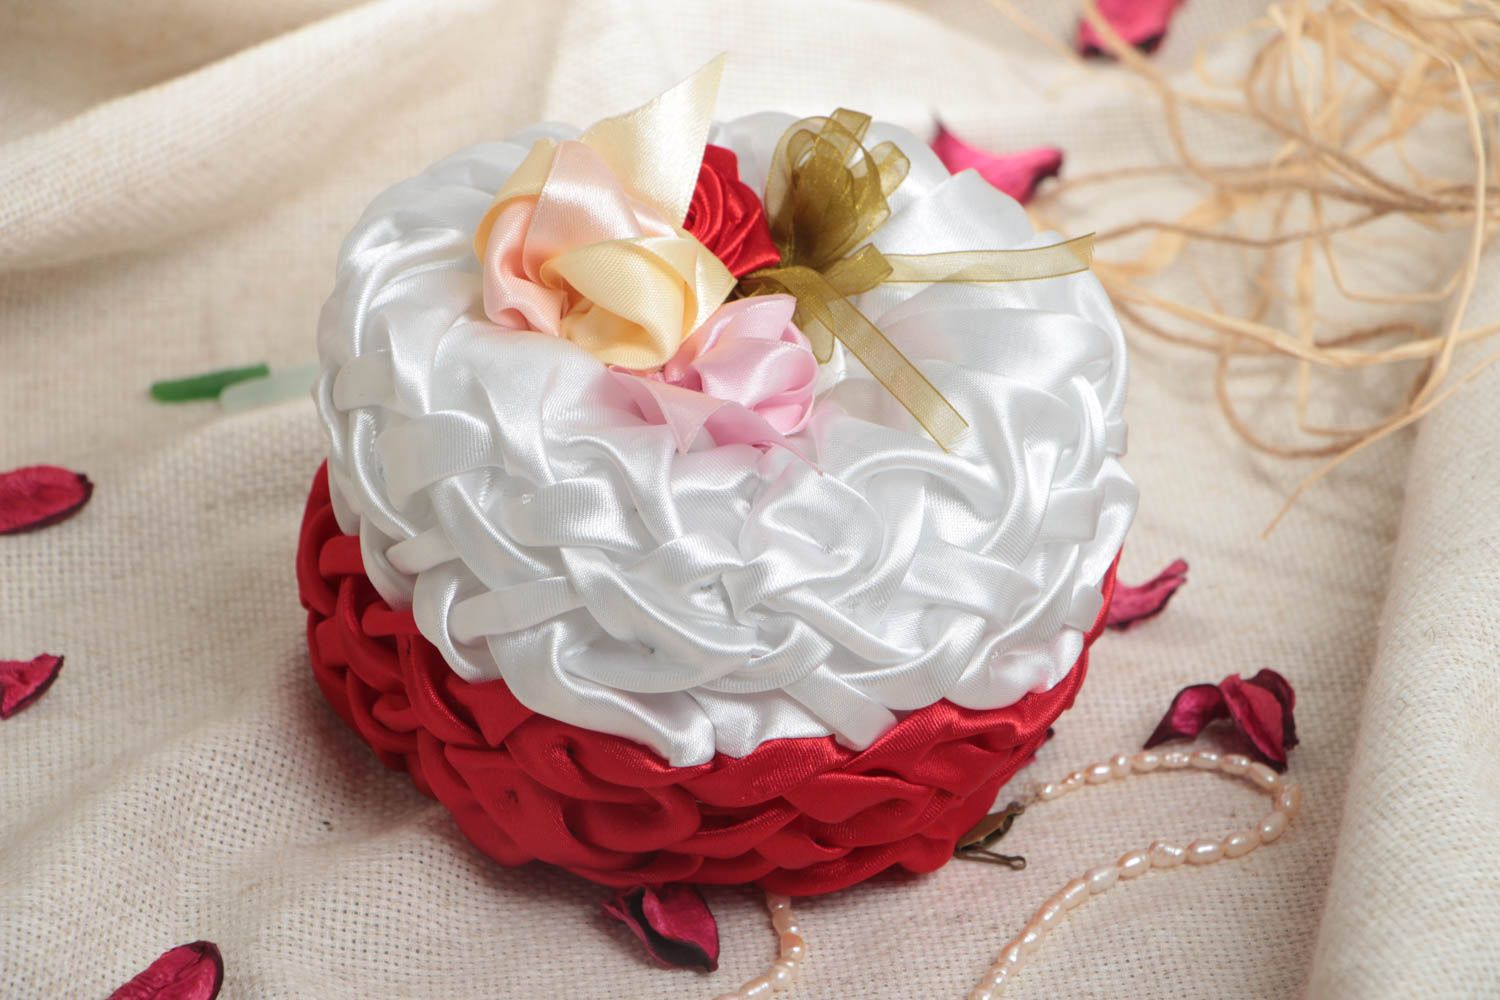 Handmade wedding satin ring pillow with flowers and red and white ribbons photo 1